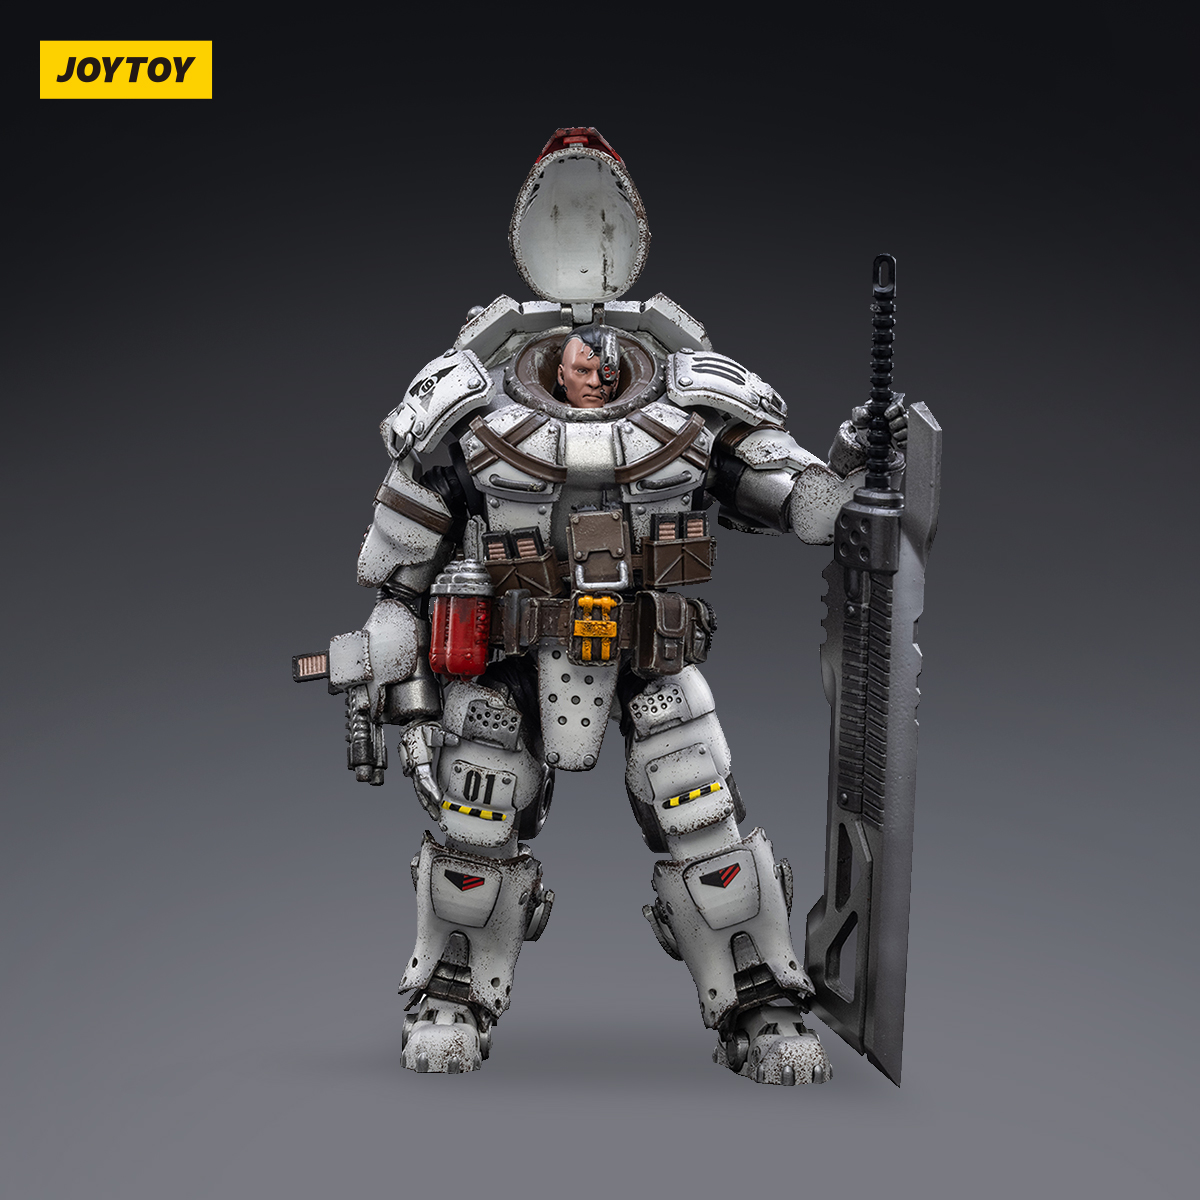 JOYTOY JT3051 1:18 Sorrow Expeditionary Forces-9th Army of the